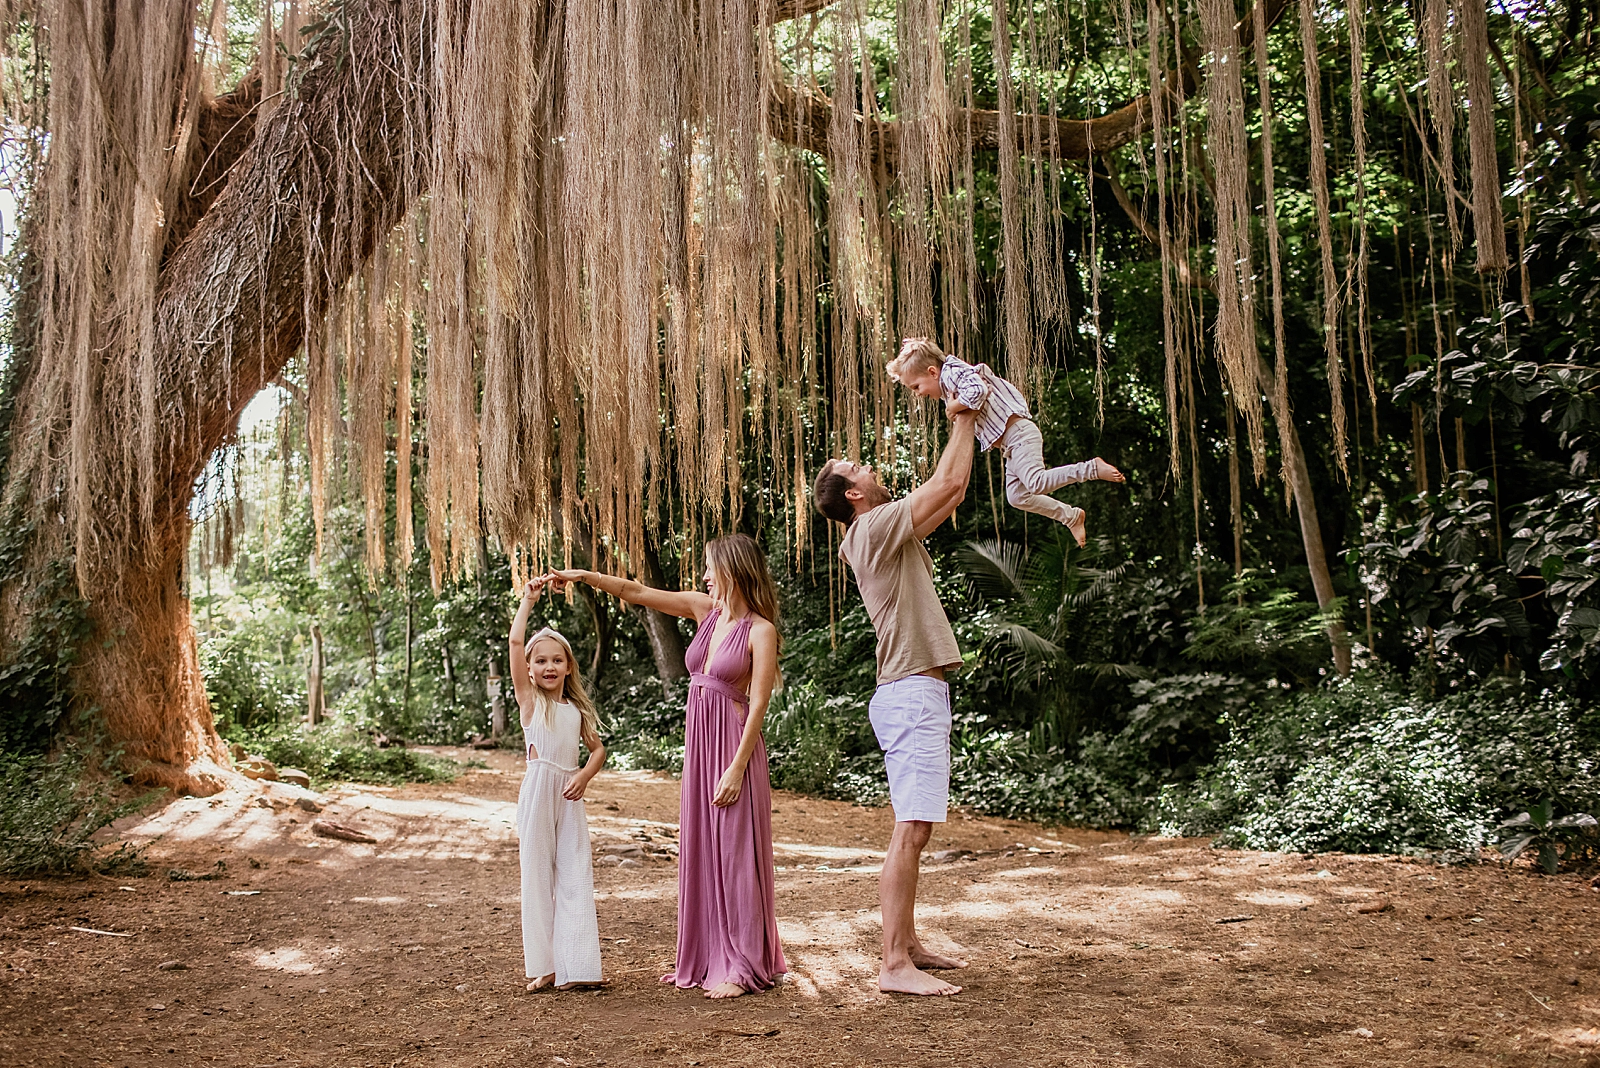 Dad throwing up son in the air and daughter twirling by Mother's hand while they are under tree